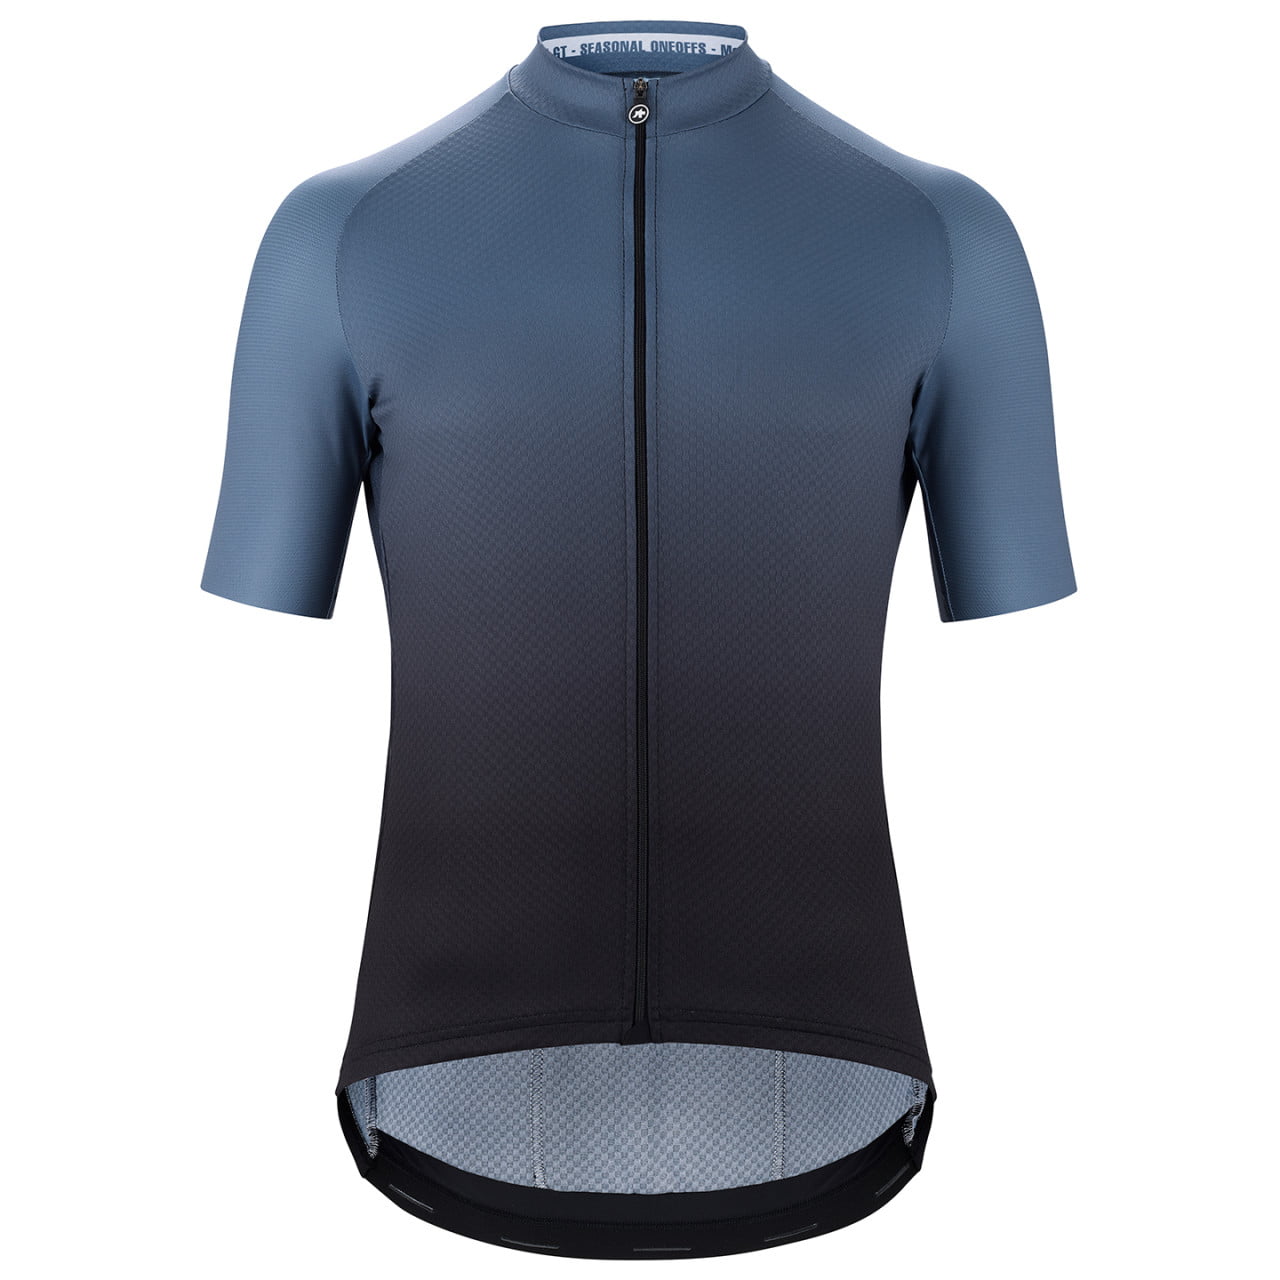 Maillot mangas cortas Mille GT c2 Shifter